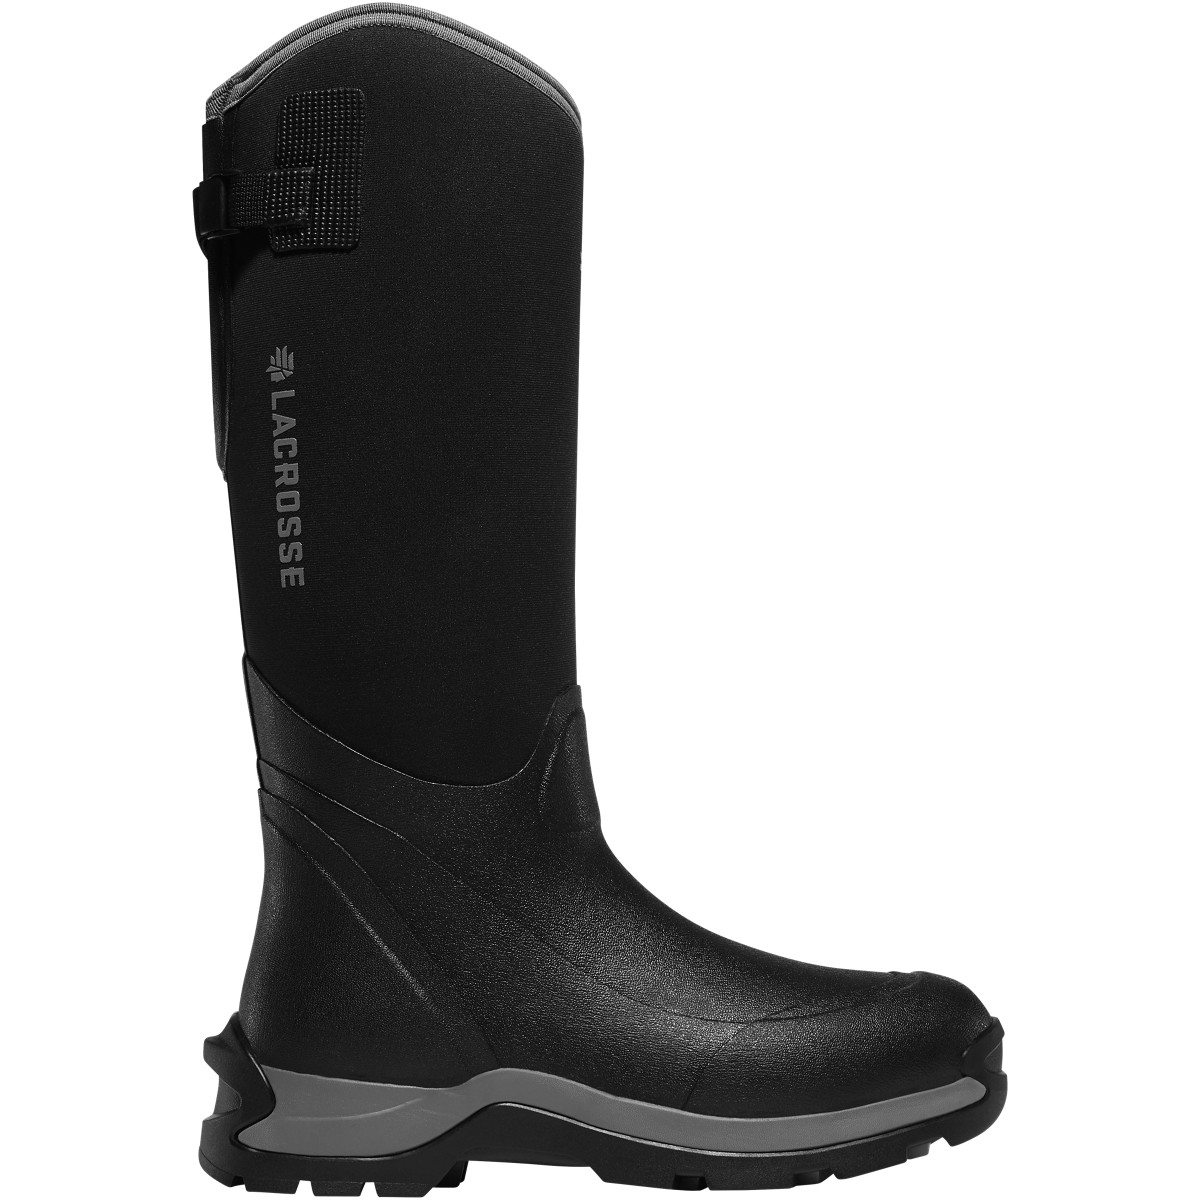 thermal boots